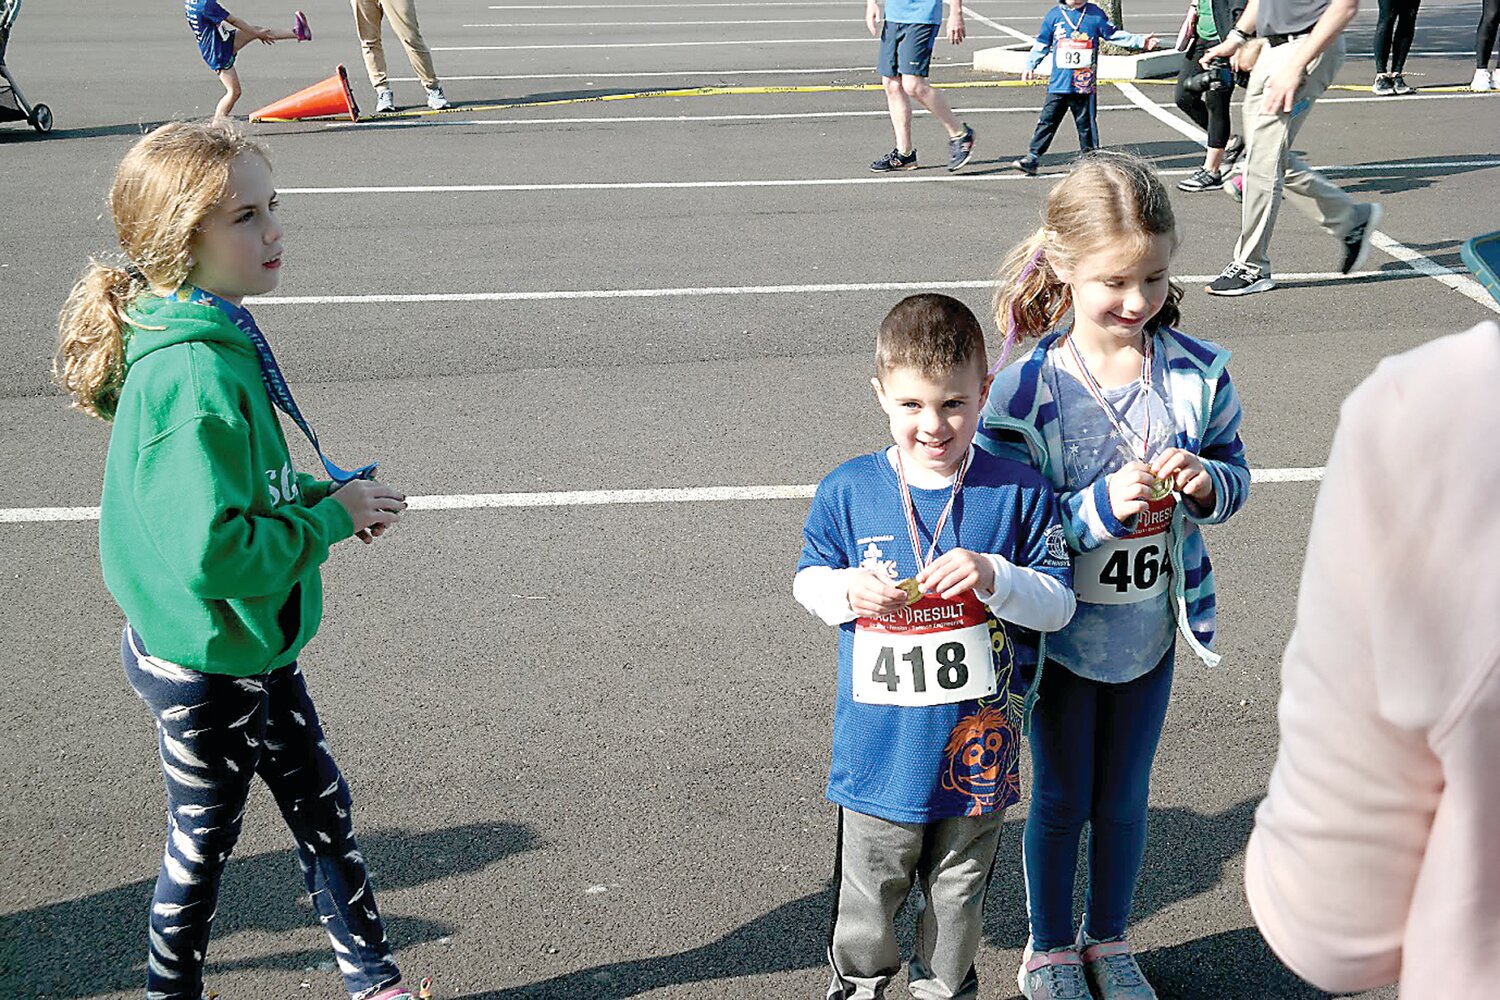 Youngsters collect their medals after competing in the Kids' Sprint at the 2023 Sesame Place Classic in Langhorne.